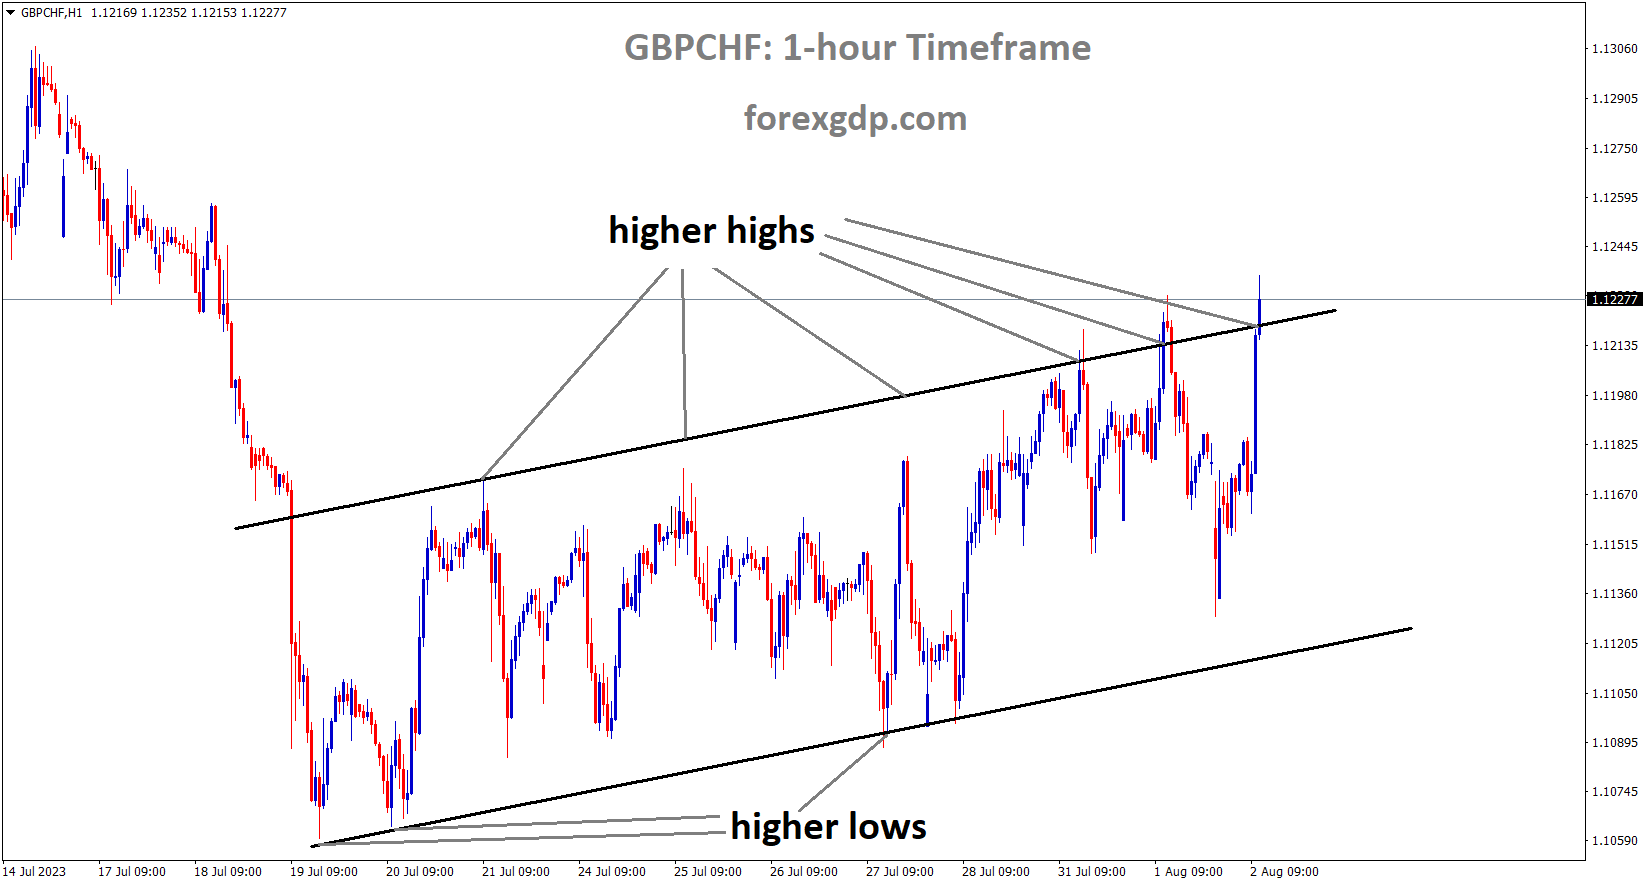 GBPCHF is moving in an Ascending channel and the market has reached the higher high area of the channel